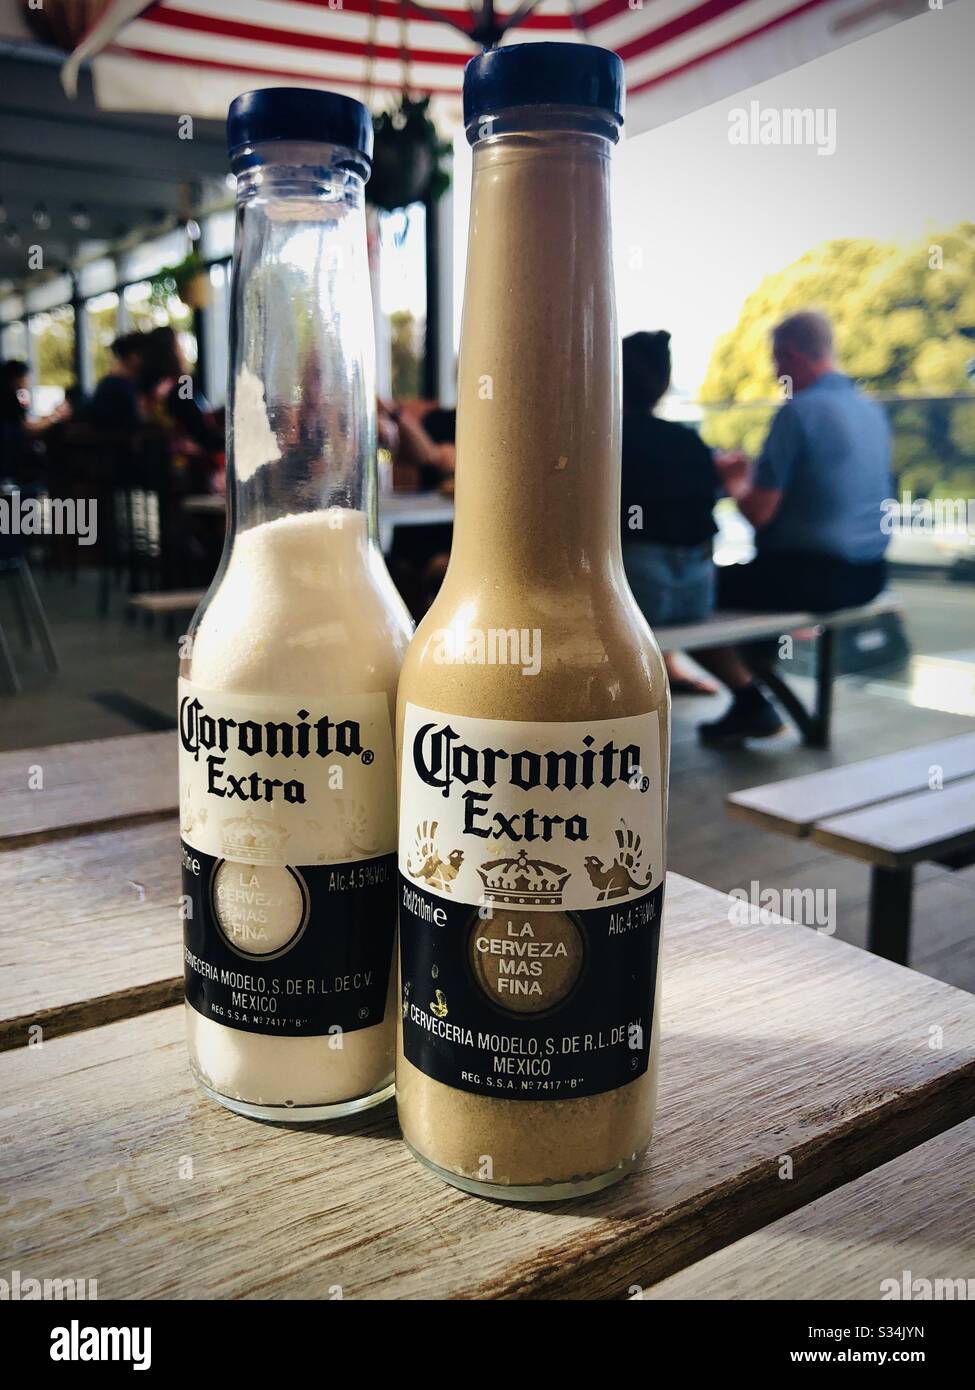 Corona beer bottles being used as salt and pepper pots Stock Photo